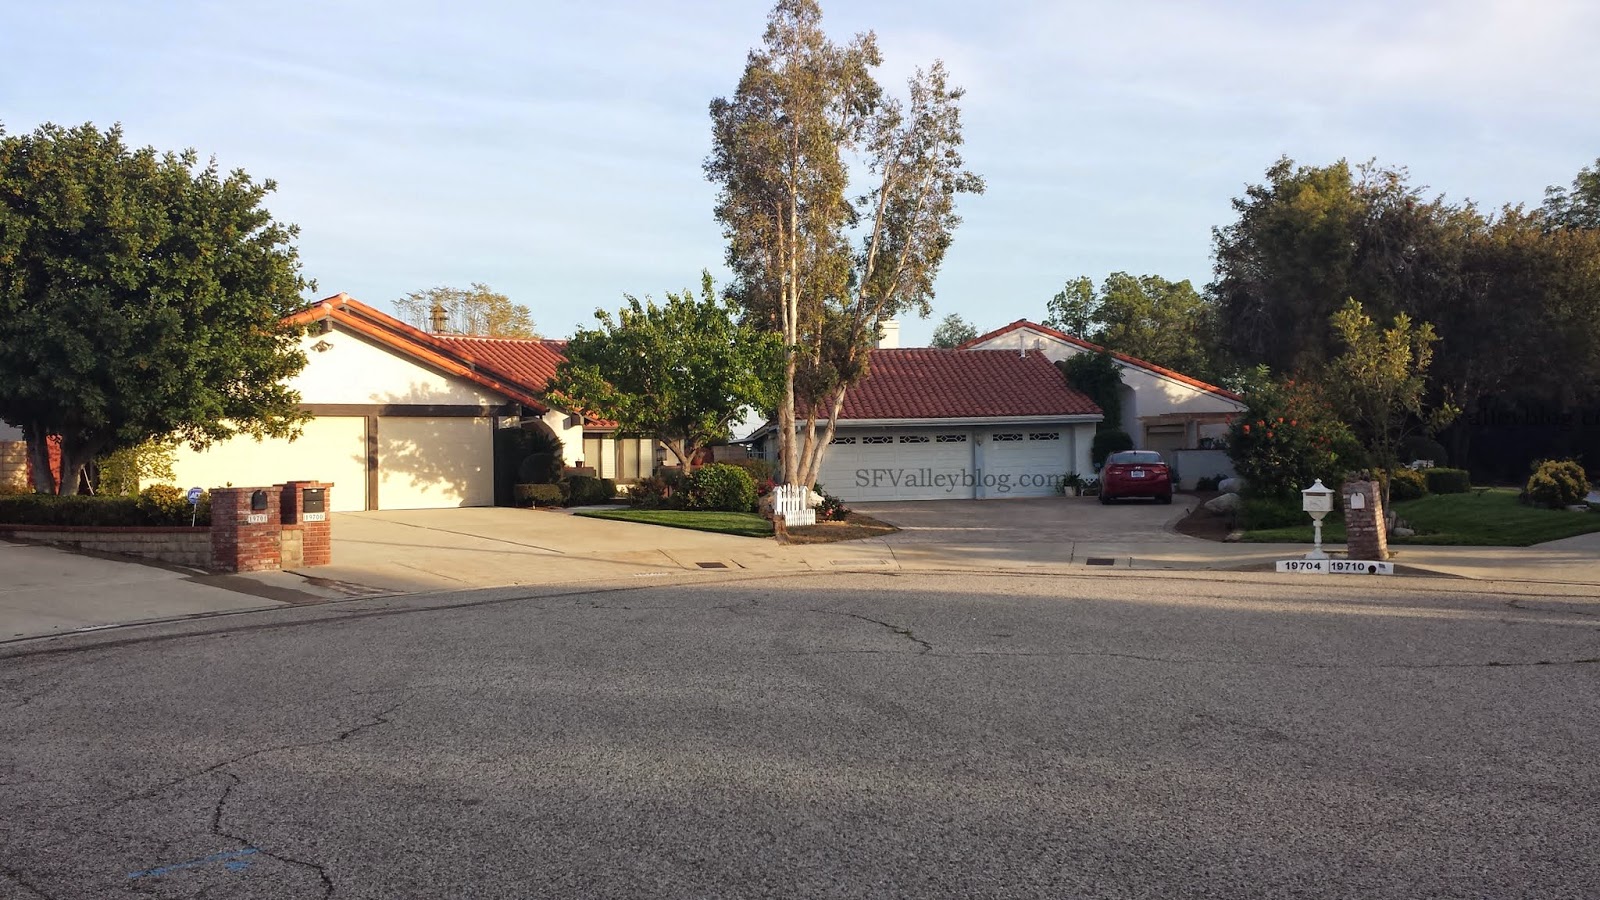 BTTF 22 Searching for Lucille Ball and Desi Arnaz's Desilu Ranch in Chatsworth San Fernando